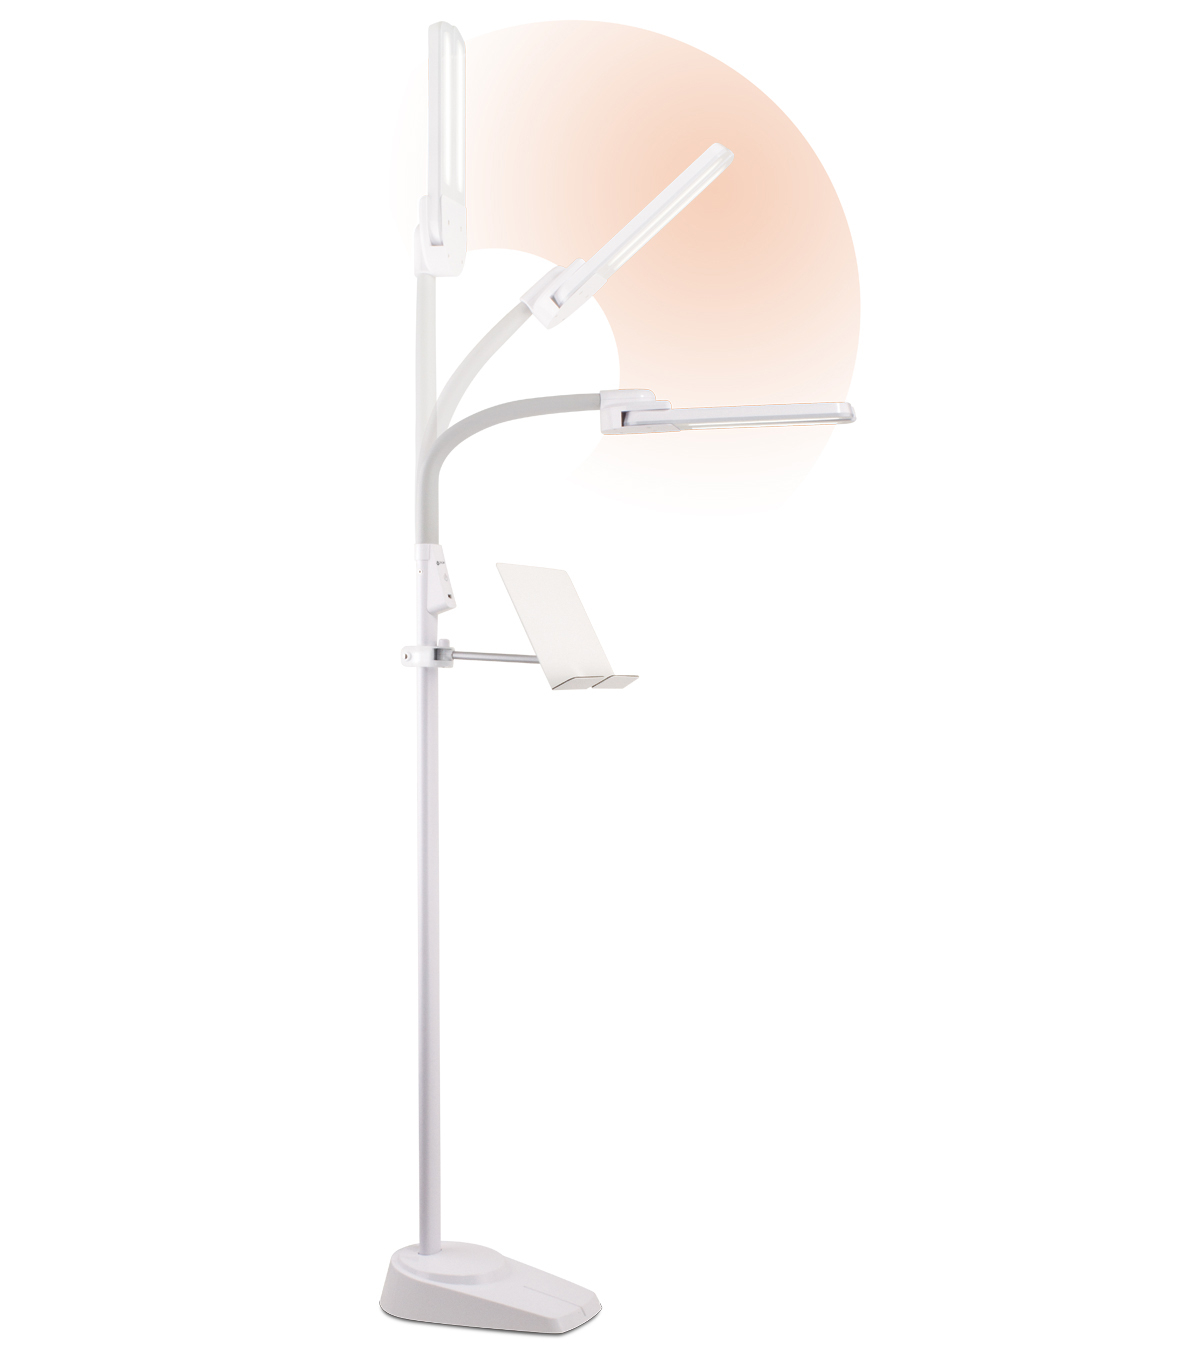 Ottlite Dual Shade Led Floor Lamp With Usb Charging Station White throughout proportions 1200 X 1360